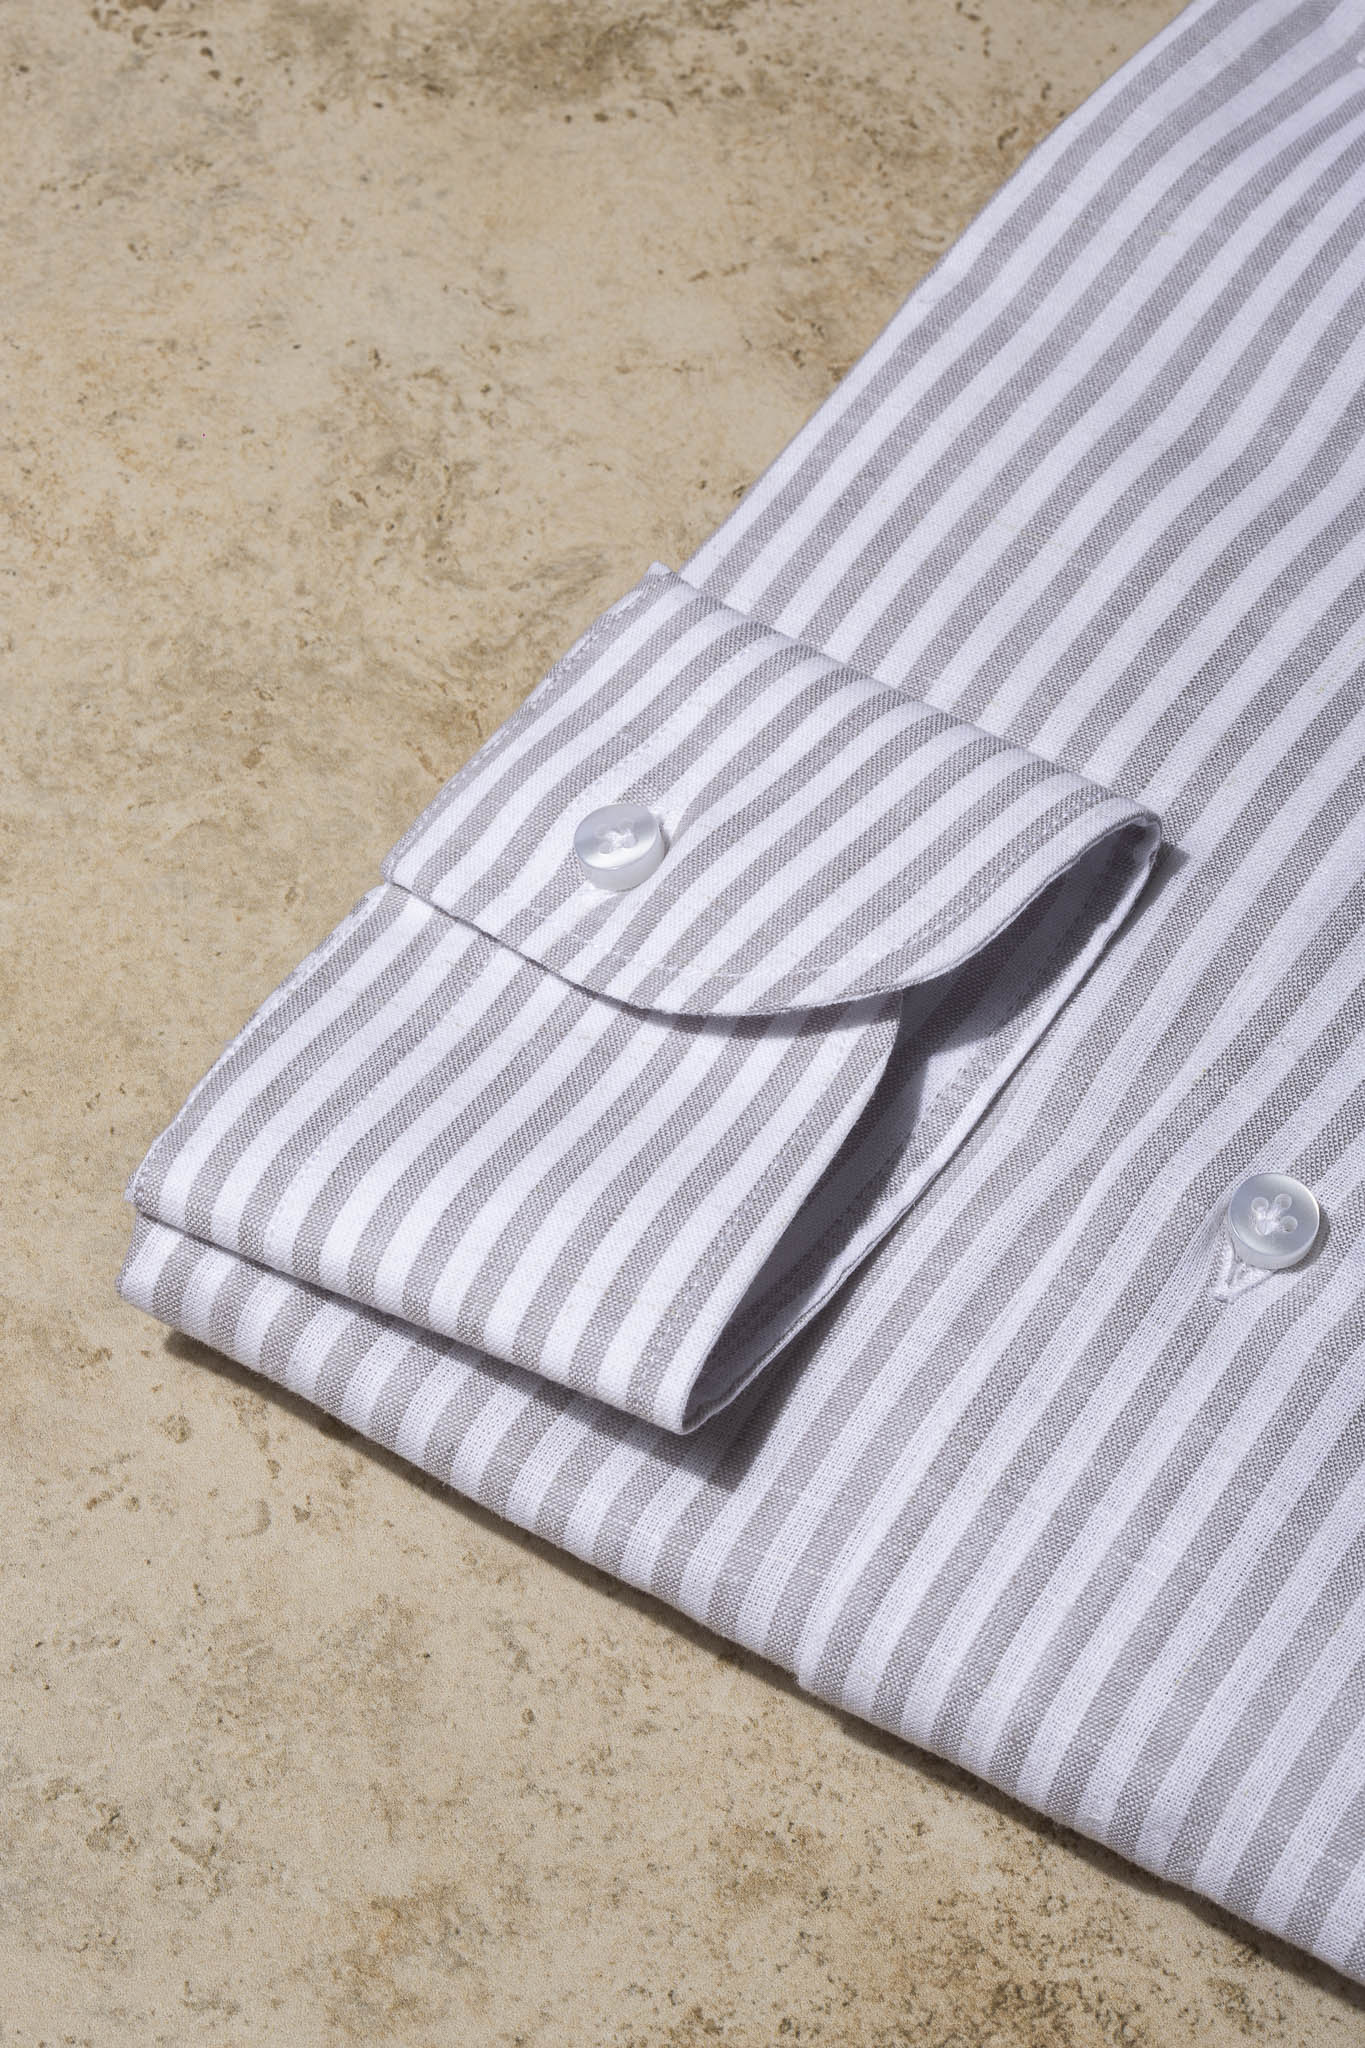 Light grey striped shirt - Made in Italy